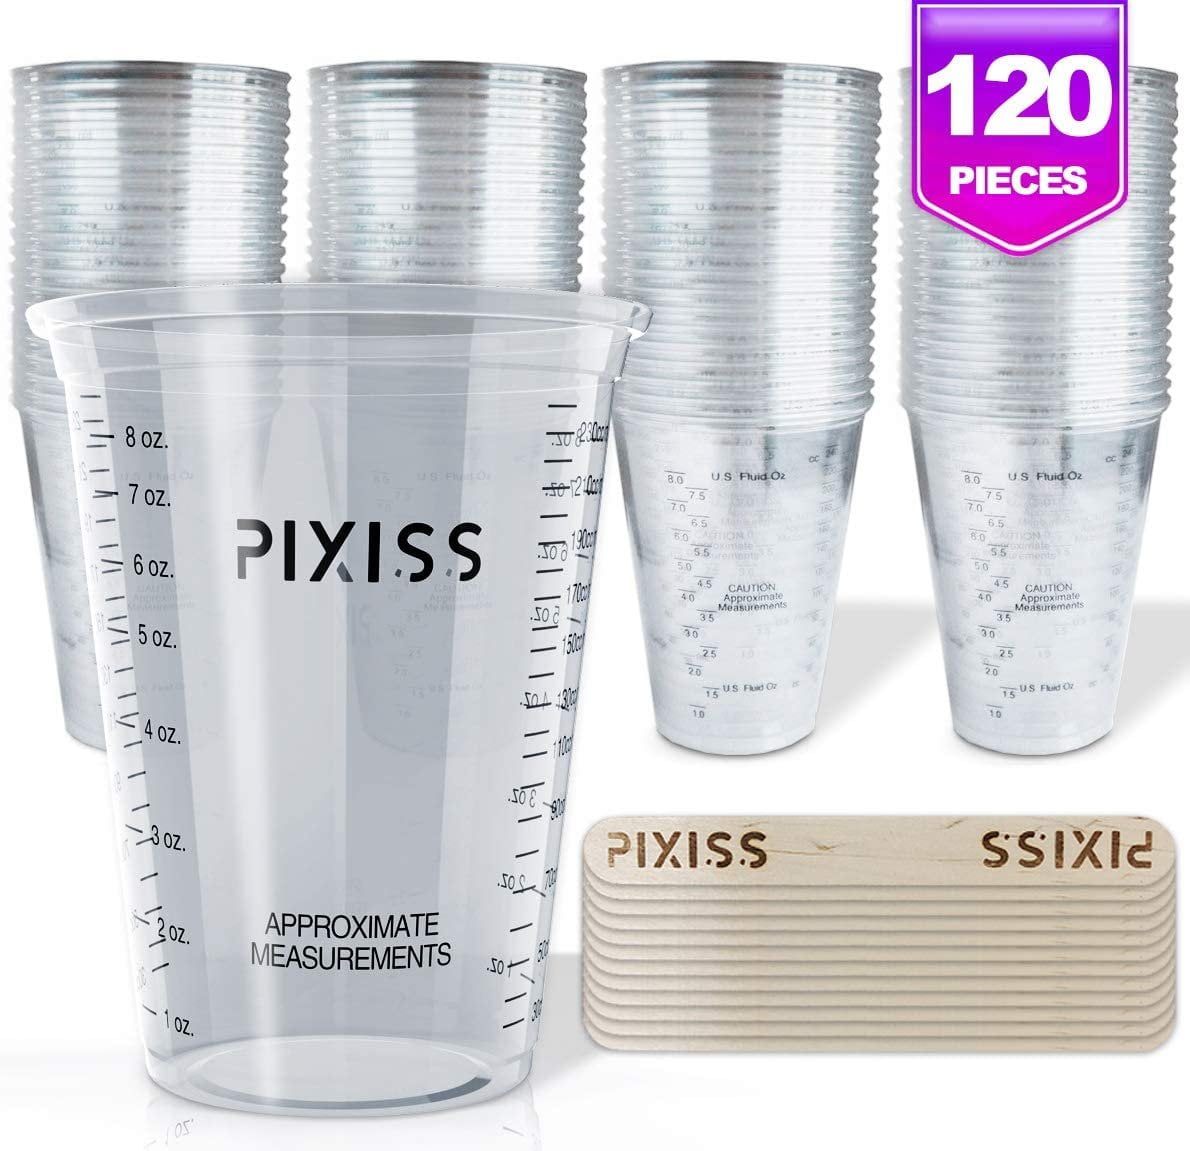 Epoxy Resin Mixing Cups – Canopus USA